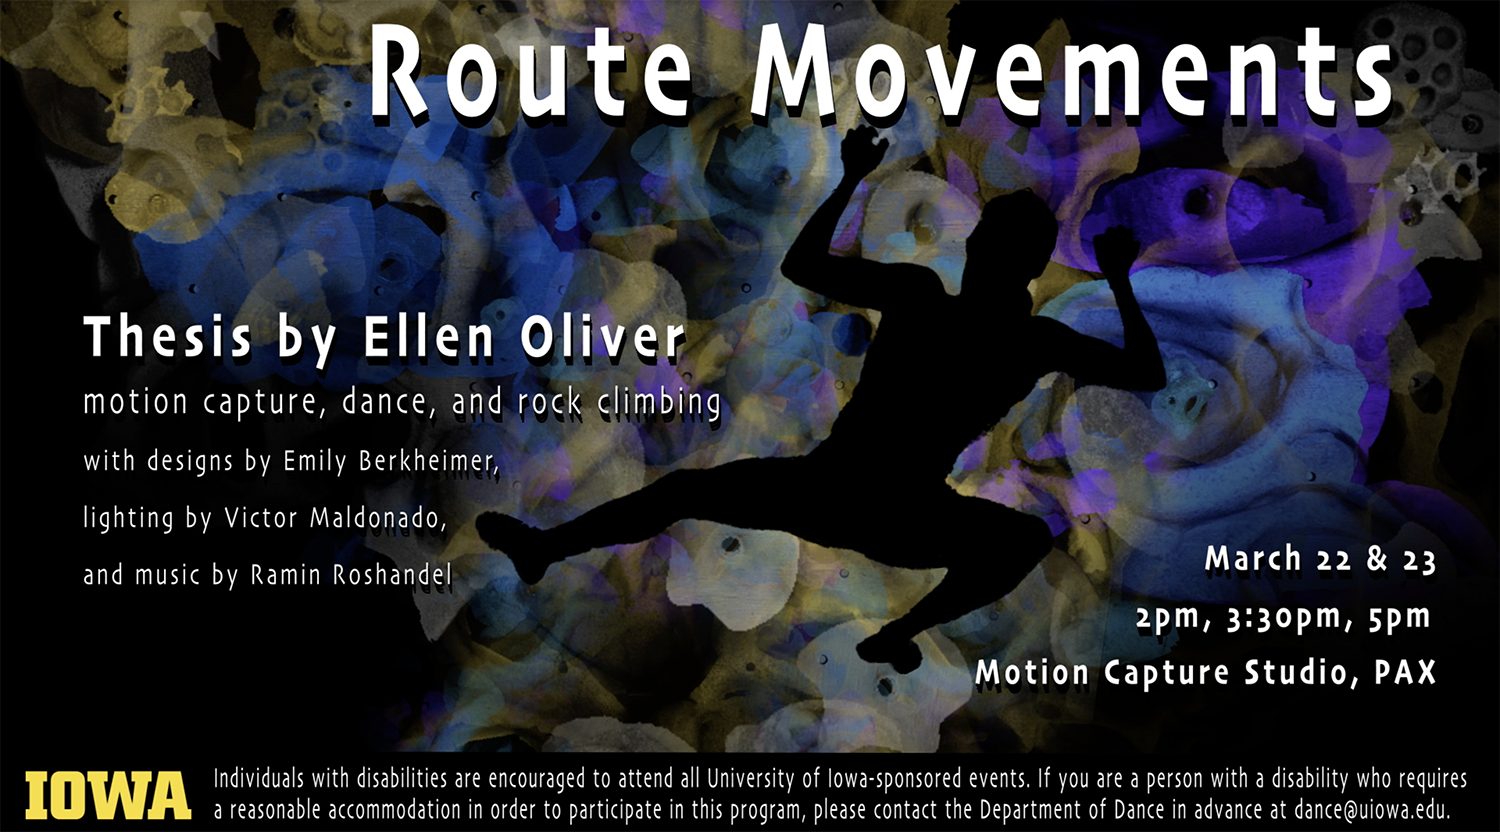 Route Movements Thesis by Ellen Oliver. Motion capture, dance, and rock climbing.